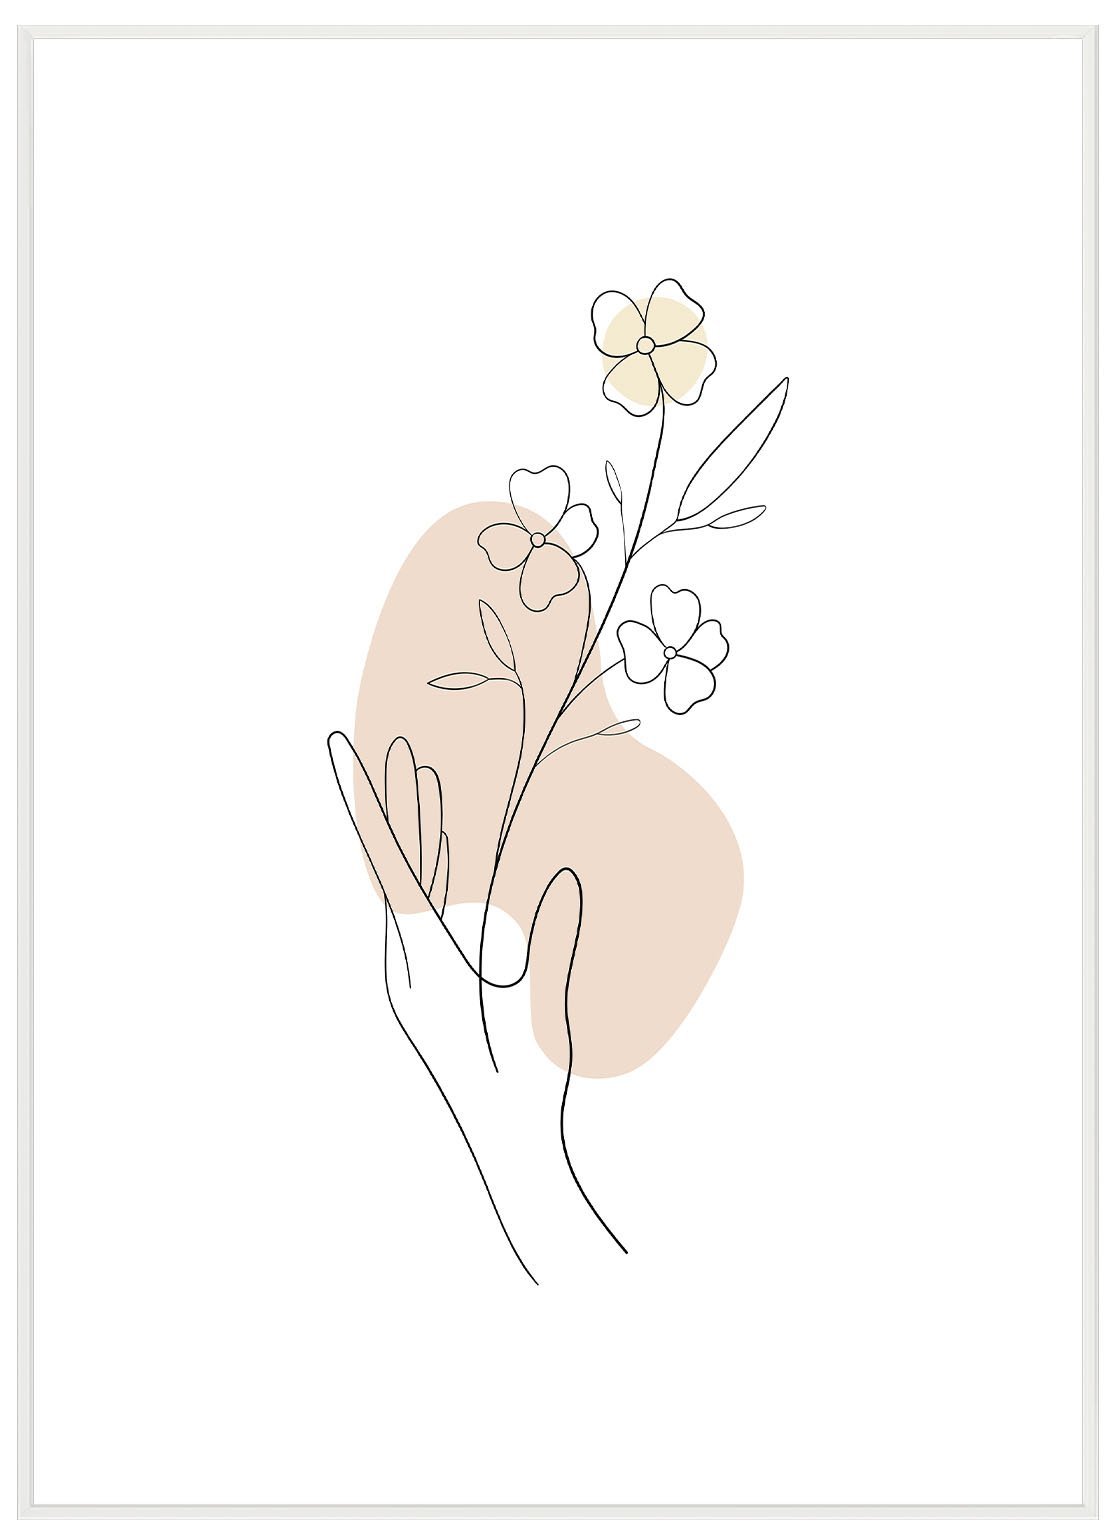 Lineart Hand Bloomed No1 - Avemfactory